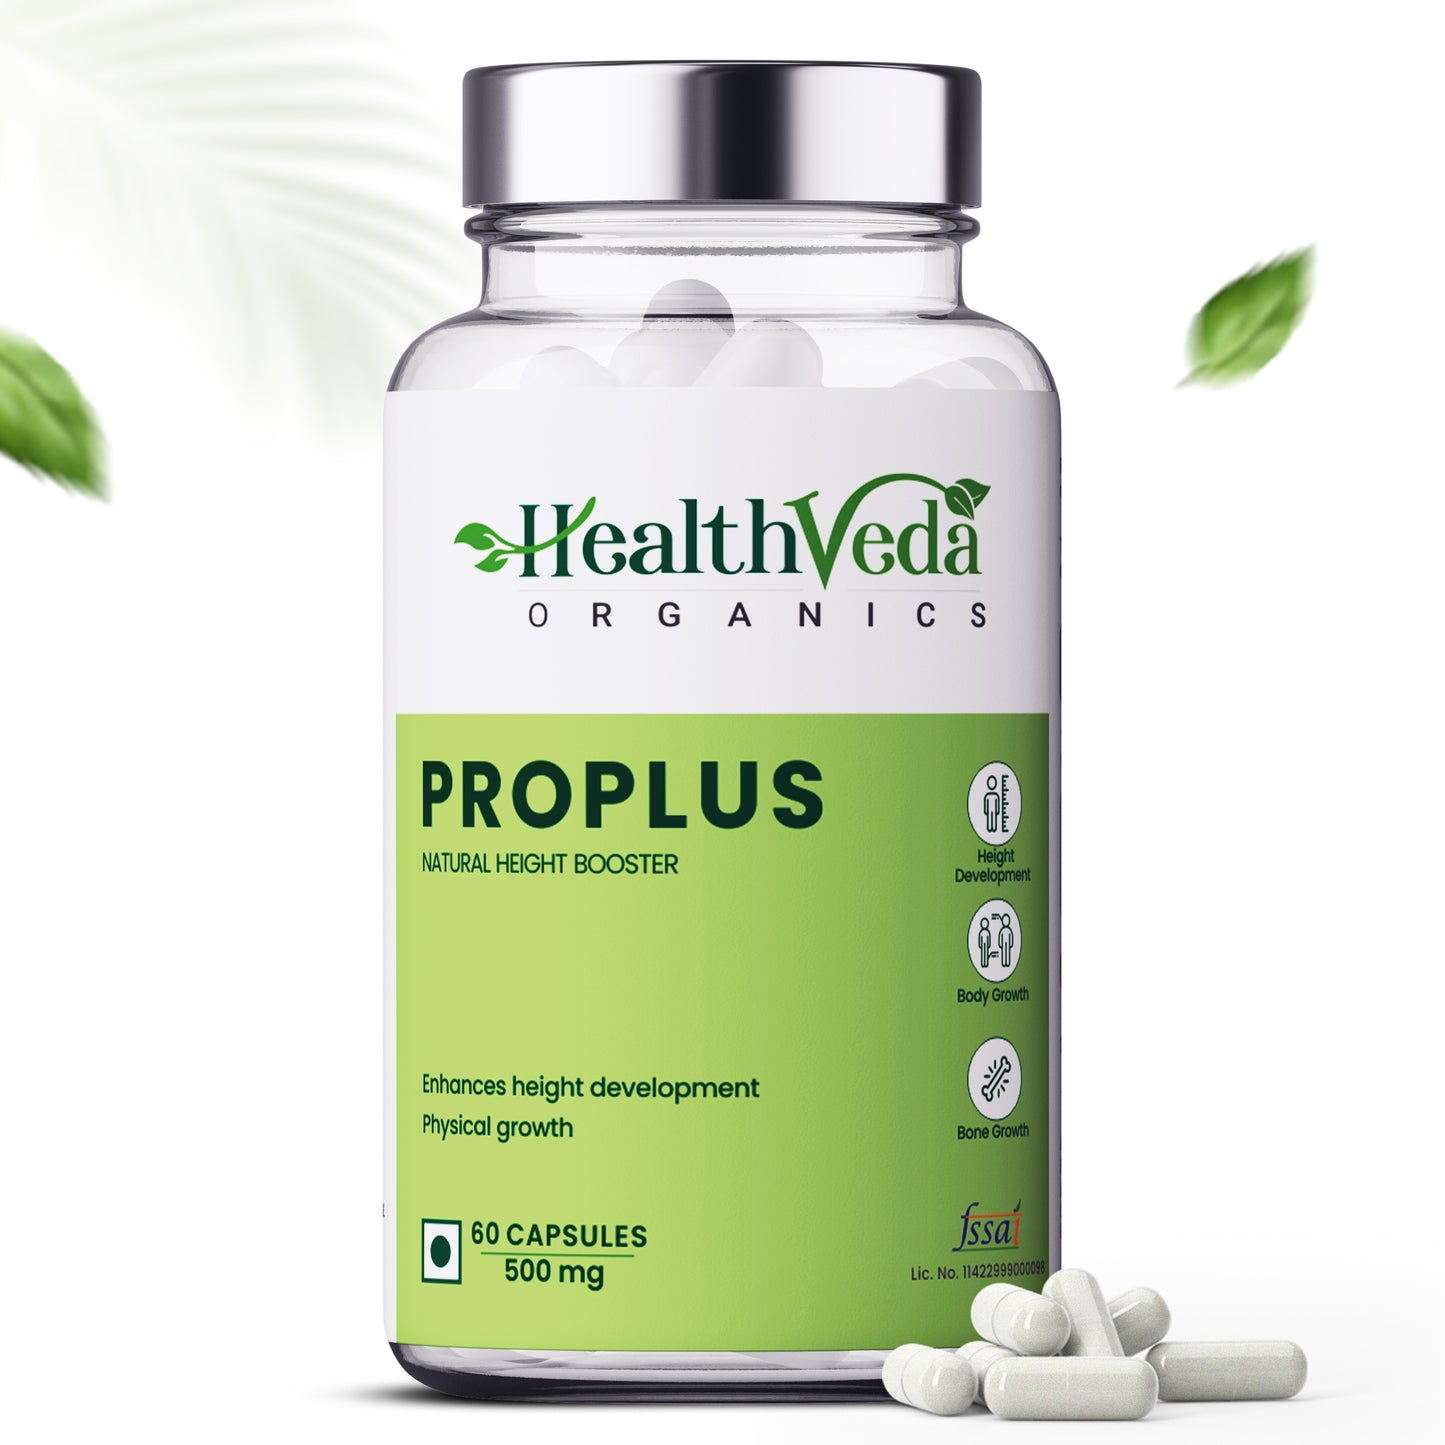 Health Veda Organics ProPlus Capsules 500mg for Good Height & Great Personality, 60 Veg Capsules